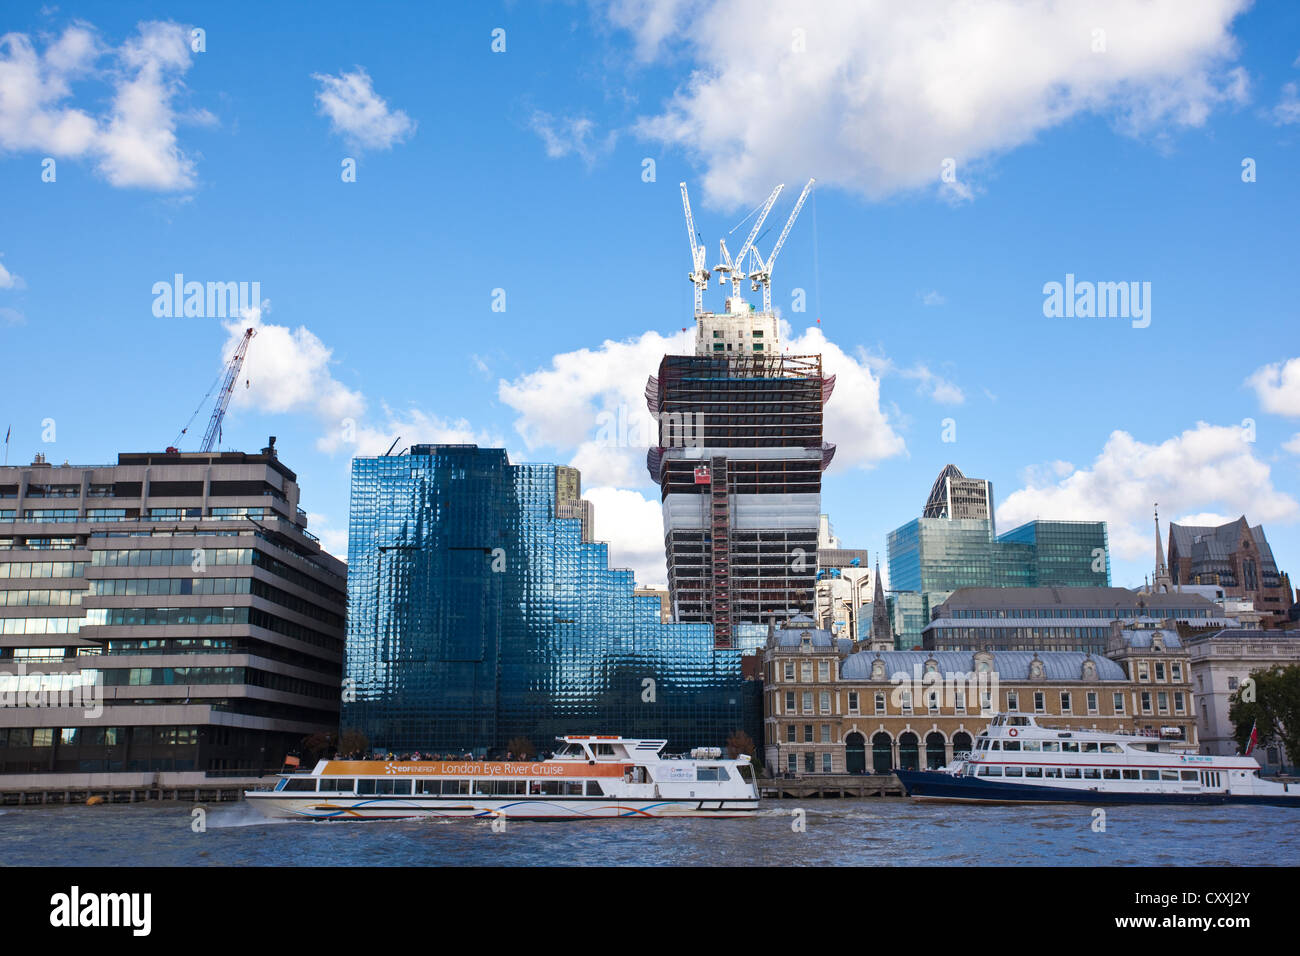 The Northern & Shell Building next to Old Billingsgate Market on north bank of Thames River, overshadowed by the City of London. Stock Photo